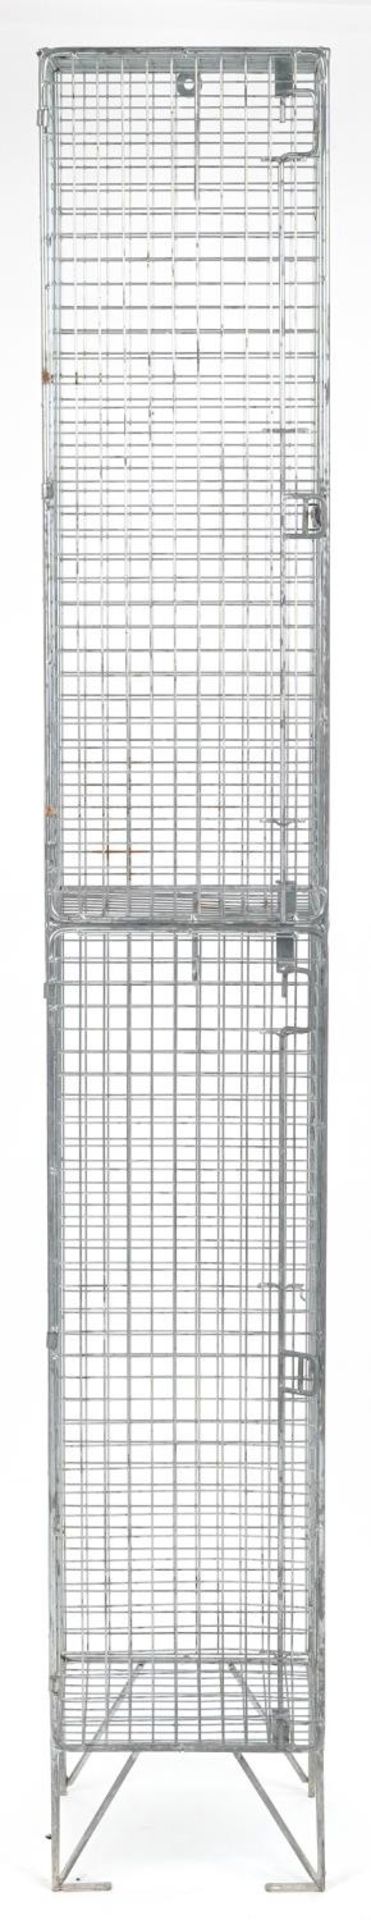 Industrial steel wire cage, 198cm H x 31cm W x 31cm D - Image 2 of 3